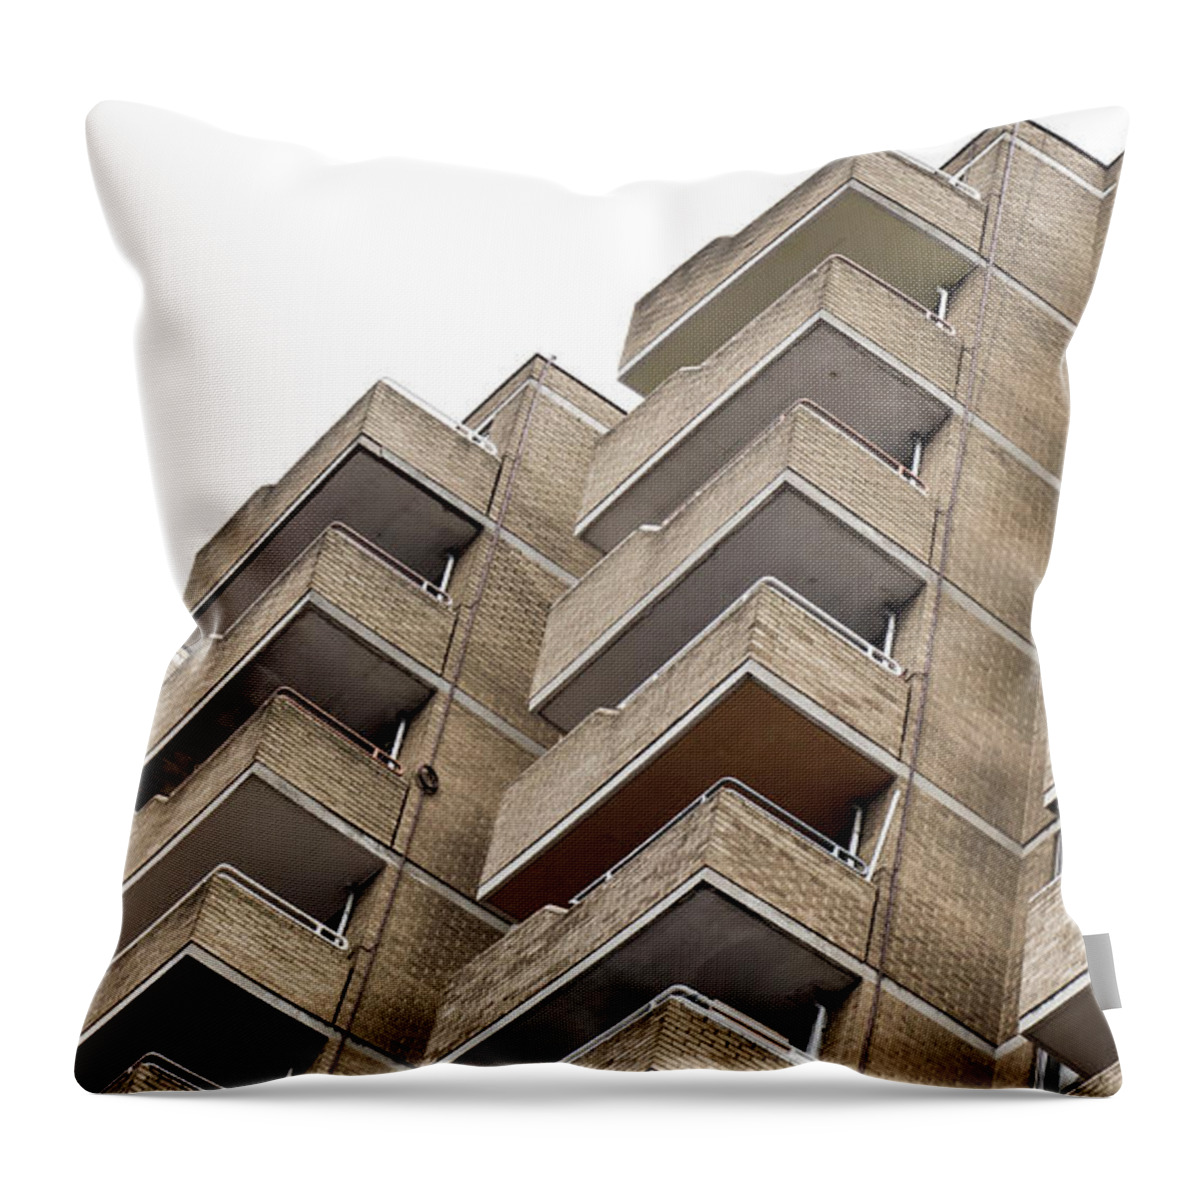 Accommodation Throw Pillow featuring the photograph Balconies #20 by Tom Gowanlock